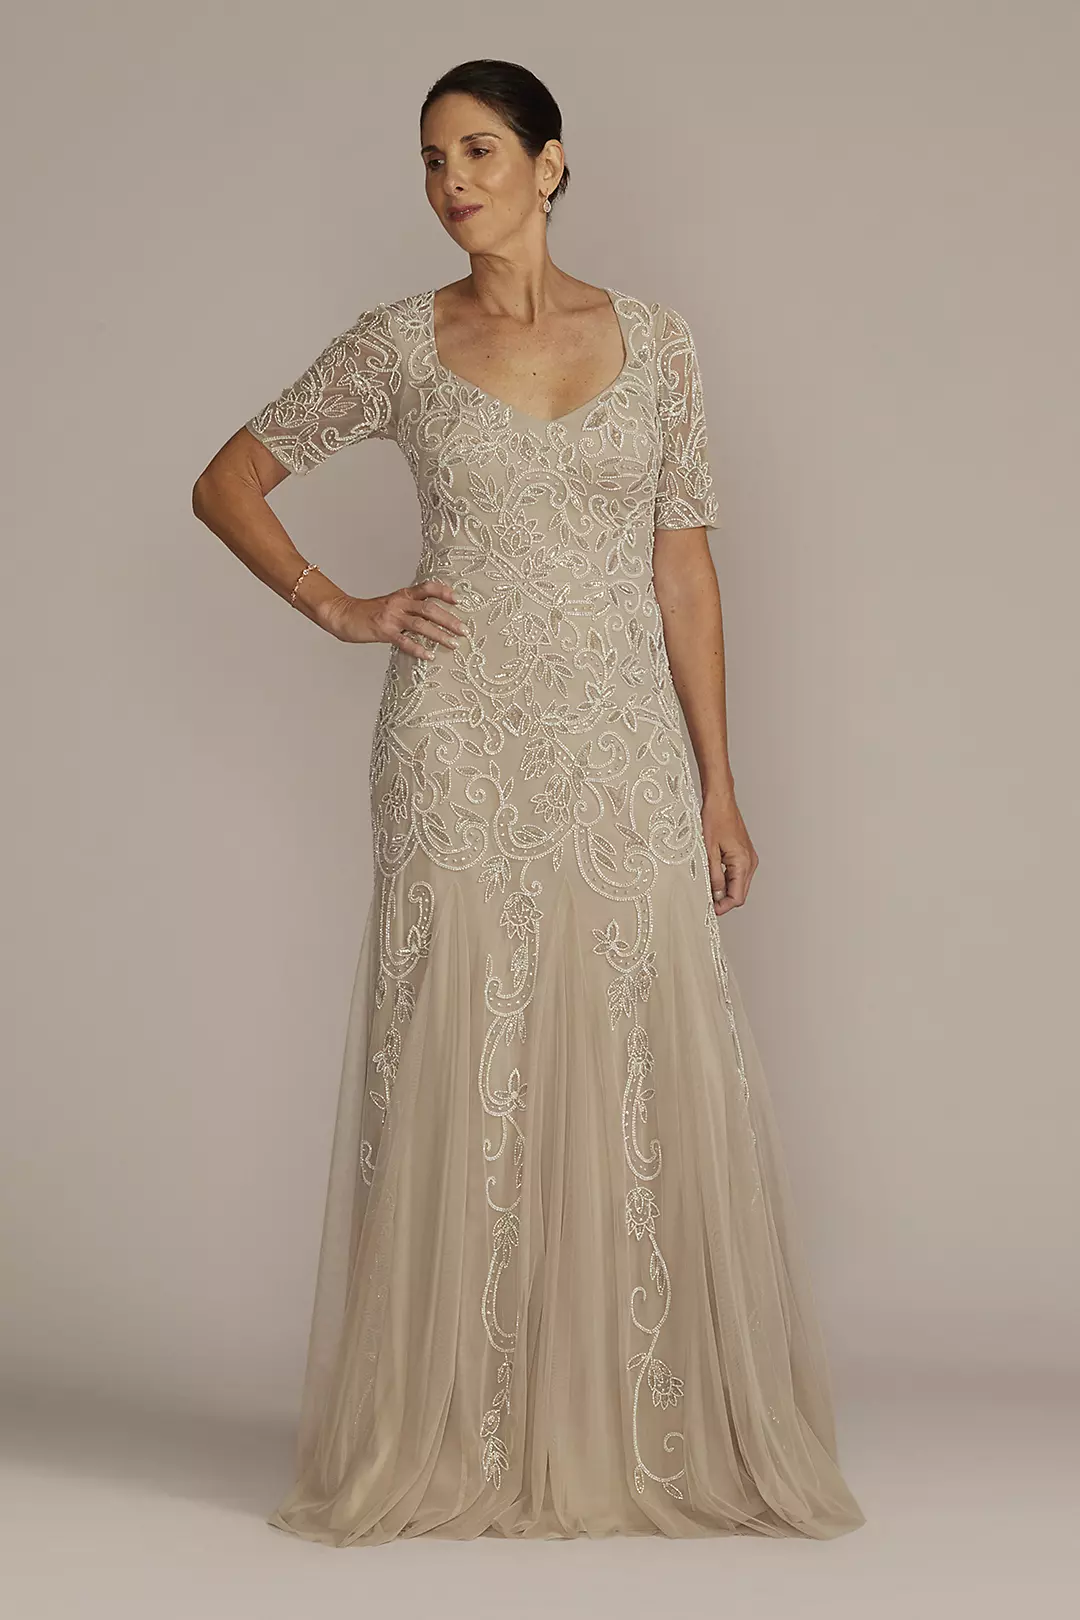 Beaded Godet Gown with Elbow Length Sleeves Image